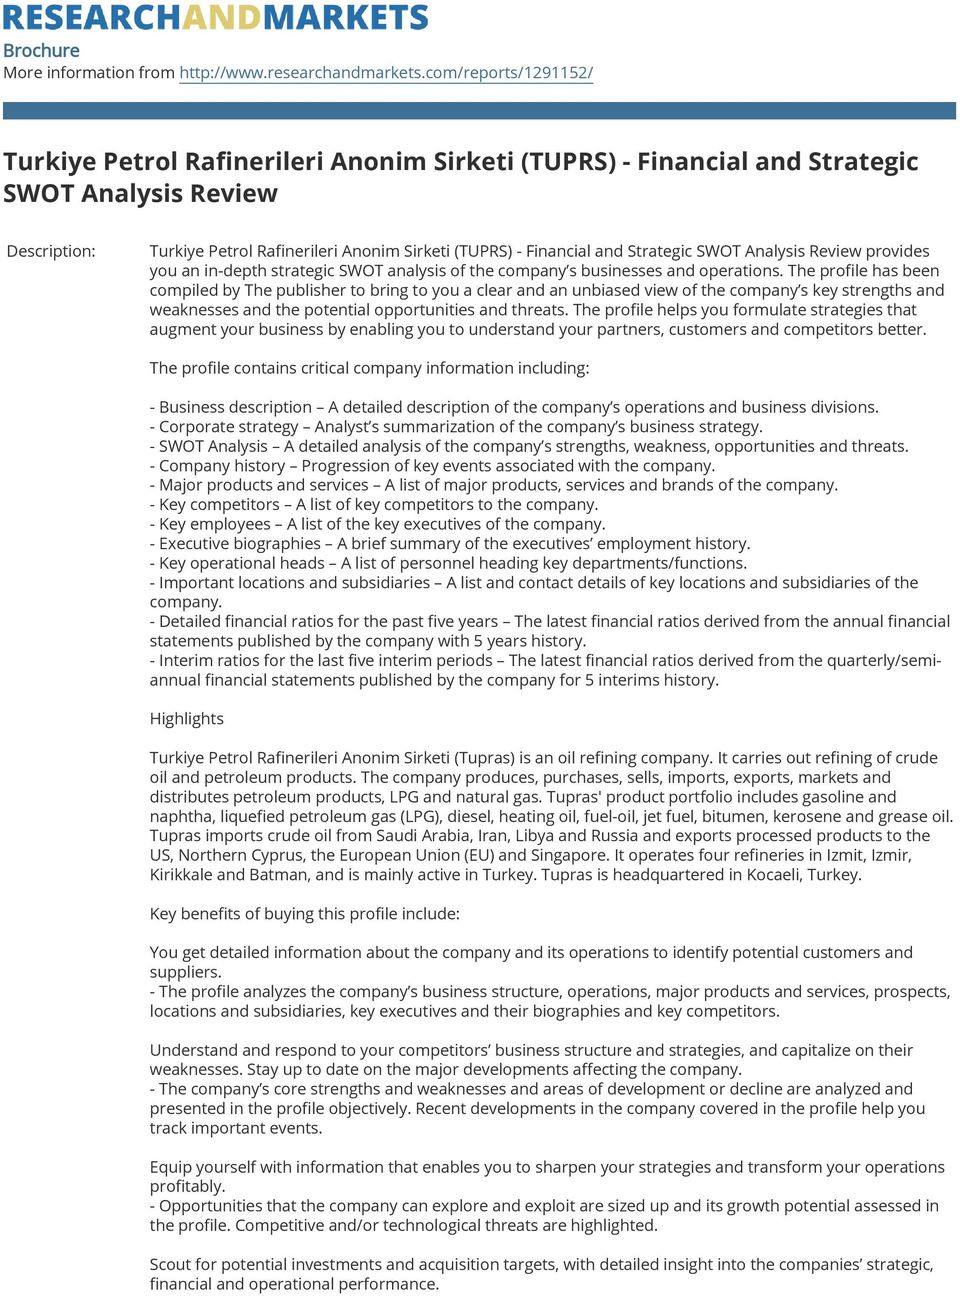 Strategic SWOT Analysis Review provides you an in-depth strategic SWOT analysis of the company s businesses and operations.